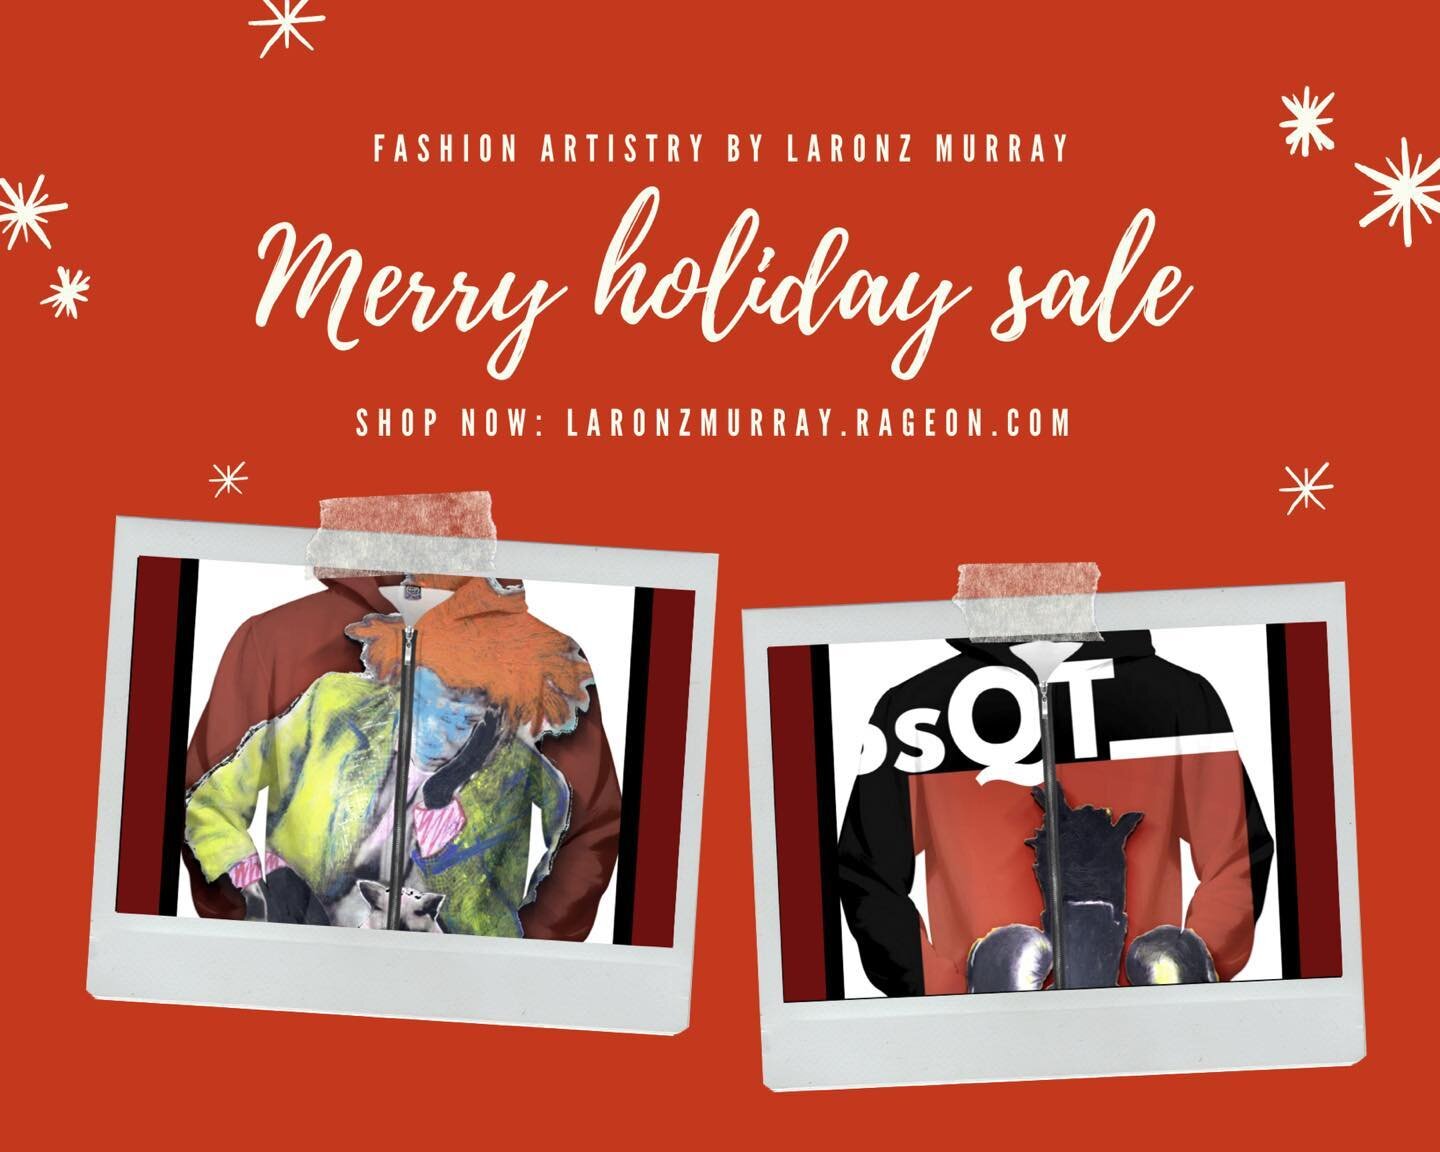 Introducing FashionARTistry from the Empire State comes our homage to the great Jean-Michel Basquiat. Shop at our Merry Holidays sales event at laronzmurray.rageon.com. #fashionmerch #instastar #poeticalartistry #fresherthanyou #soulharlem #harlemupt